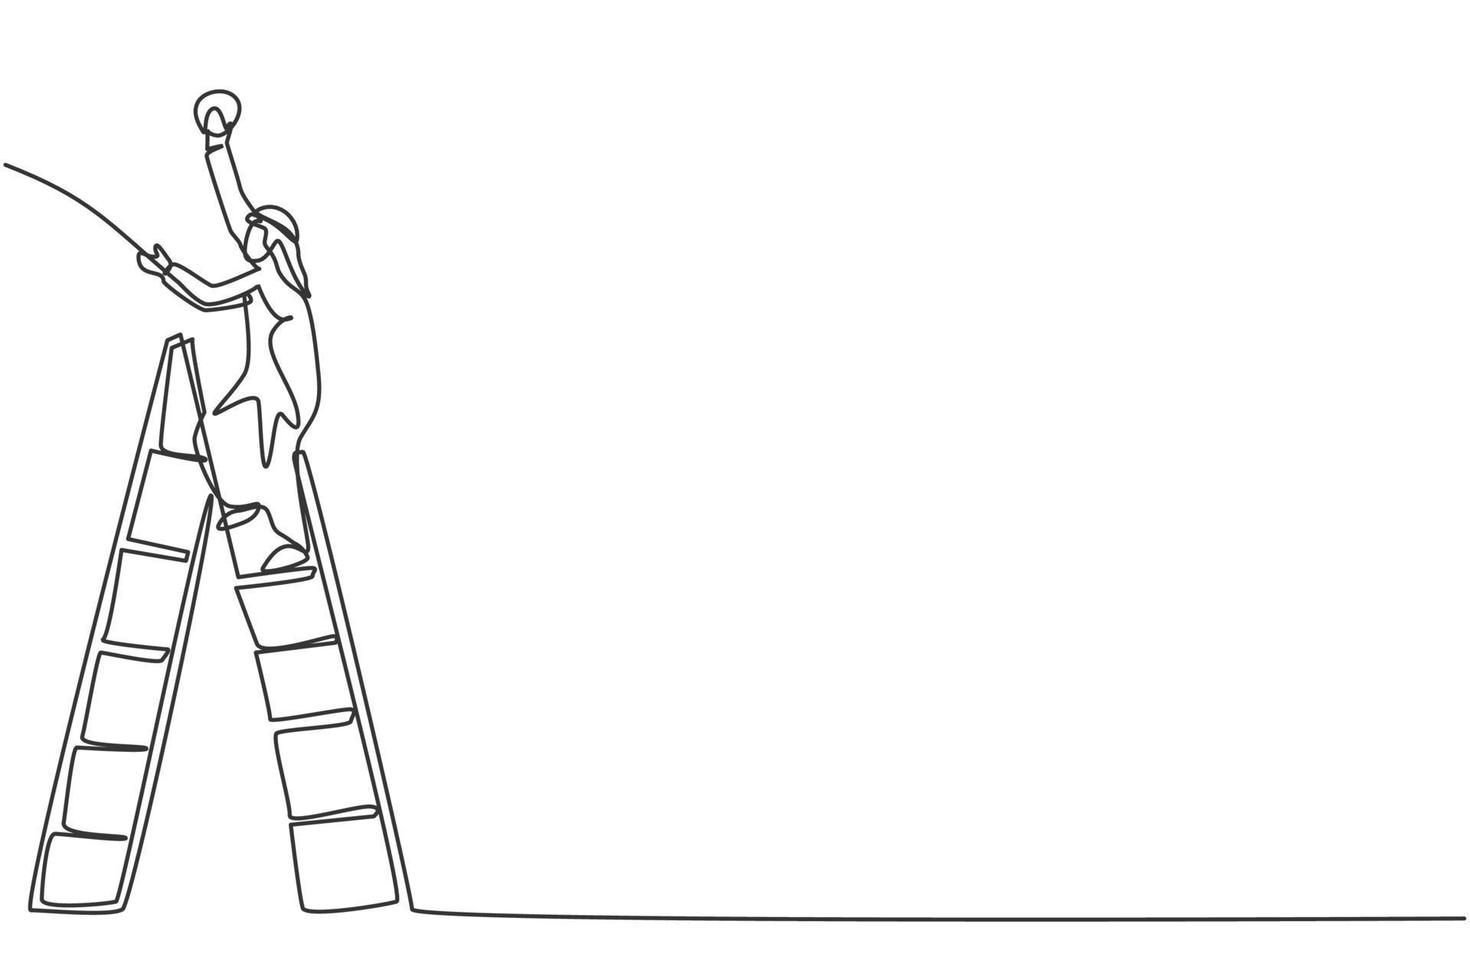 Single continuous line drawing of young Arabian handyman climb the ladder up to fix a bulb lamp. Professional worker. Minimalism concept dynamic one line draw graphic design vector illustration